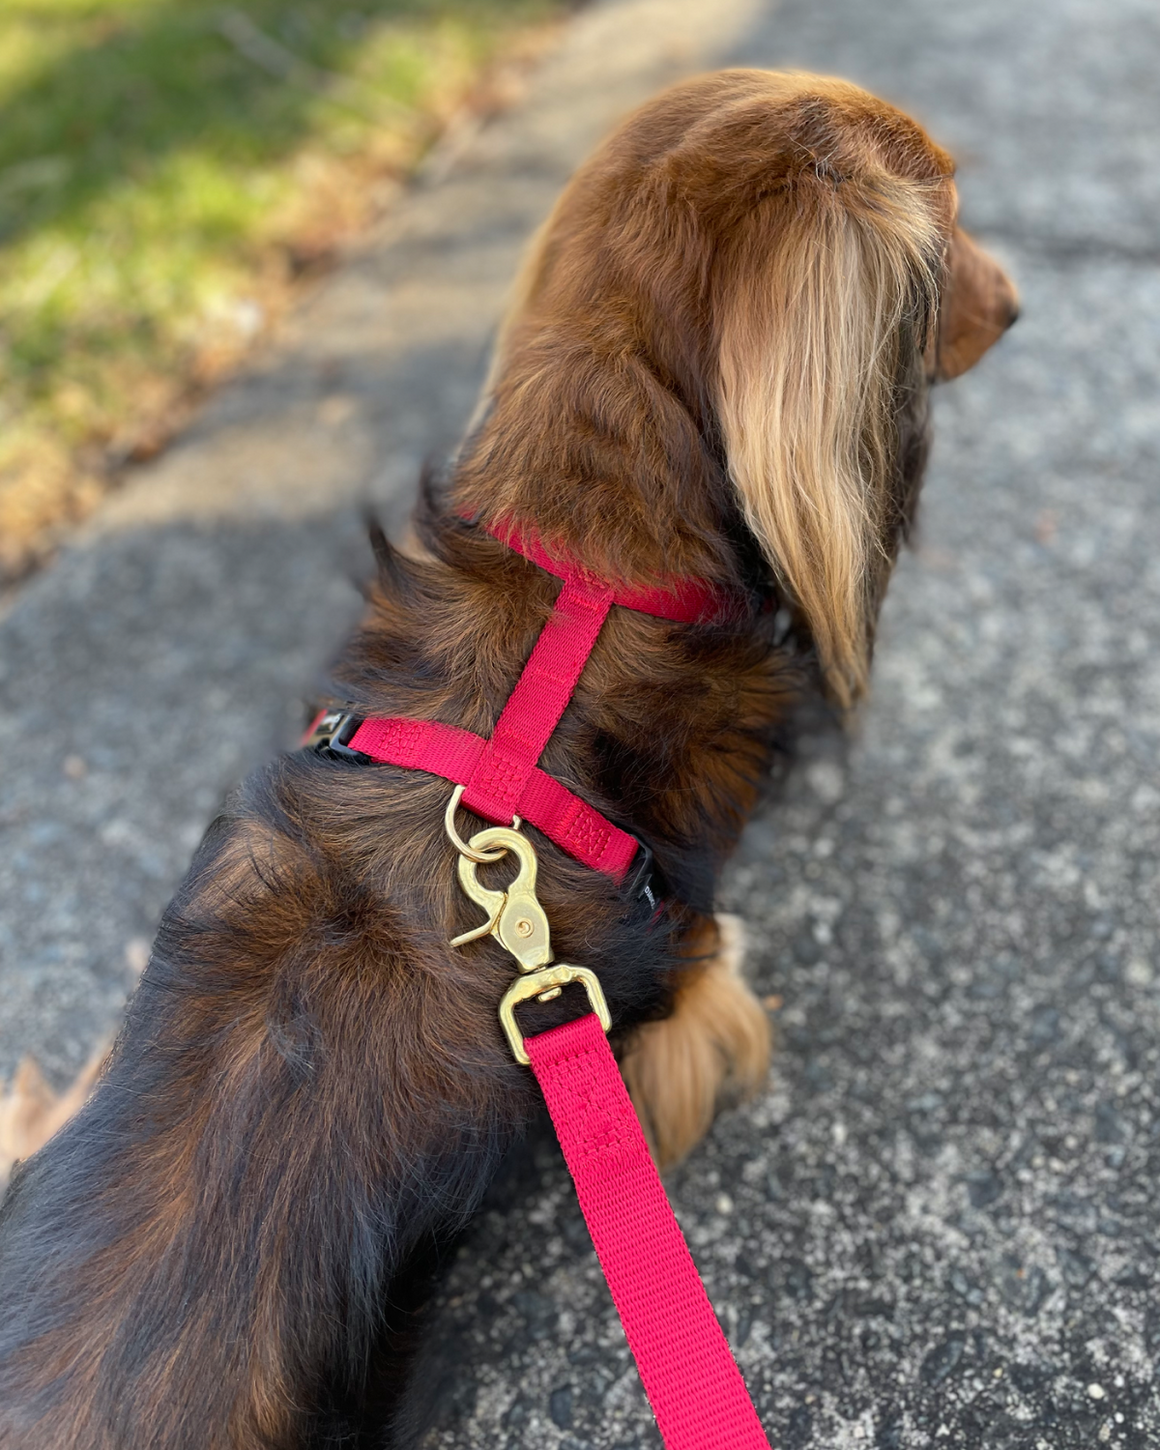 DJANGO Adventure Dog Leash in Crimson Red – Strong, Comfortable, and Stylish Dog Leash with Solid Brass Hardware and Padded Handle - Designed for Outdoor Adventures and Everyday Use - djangobrand.com